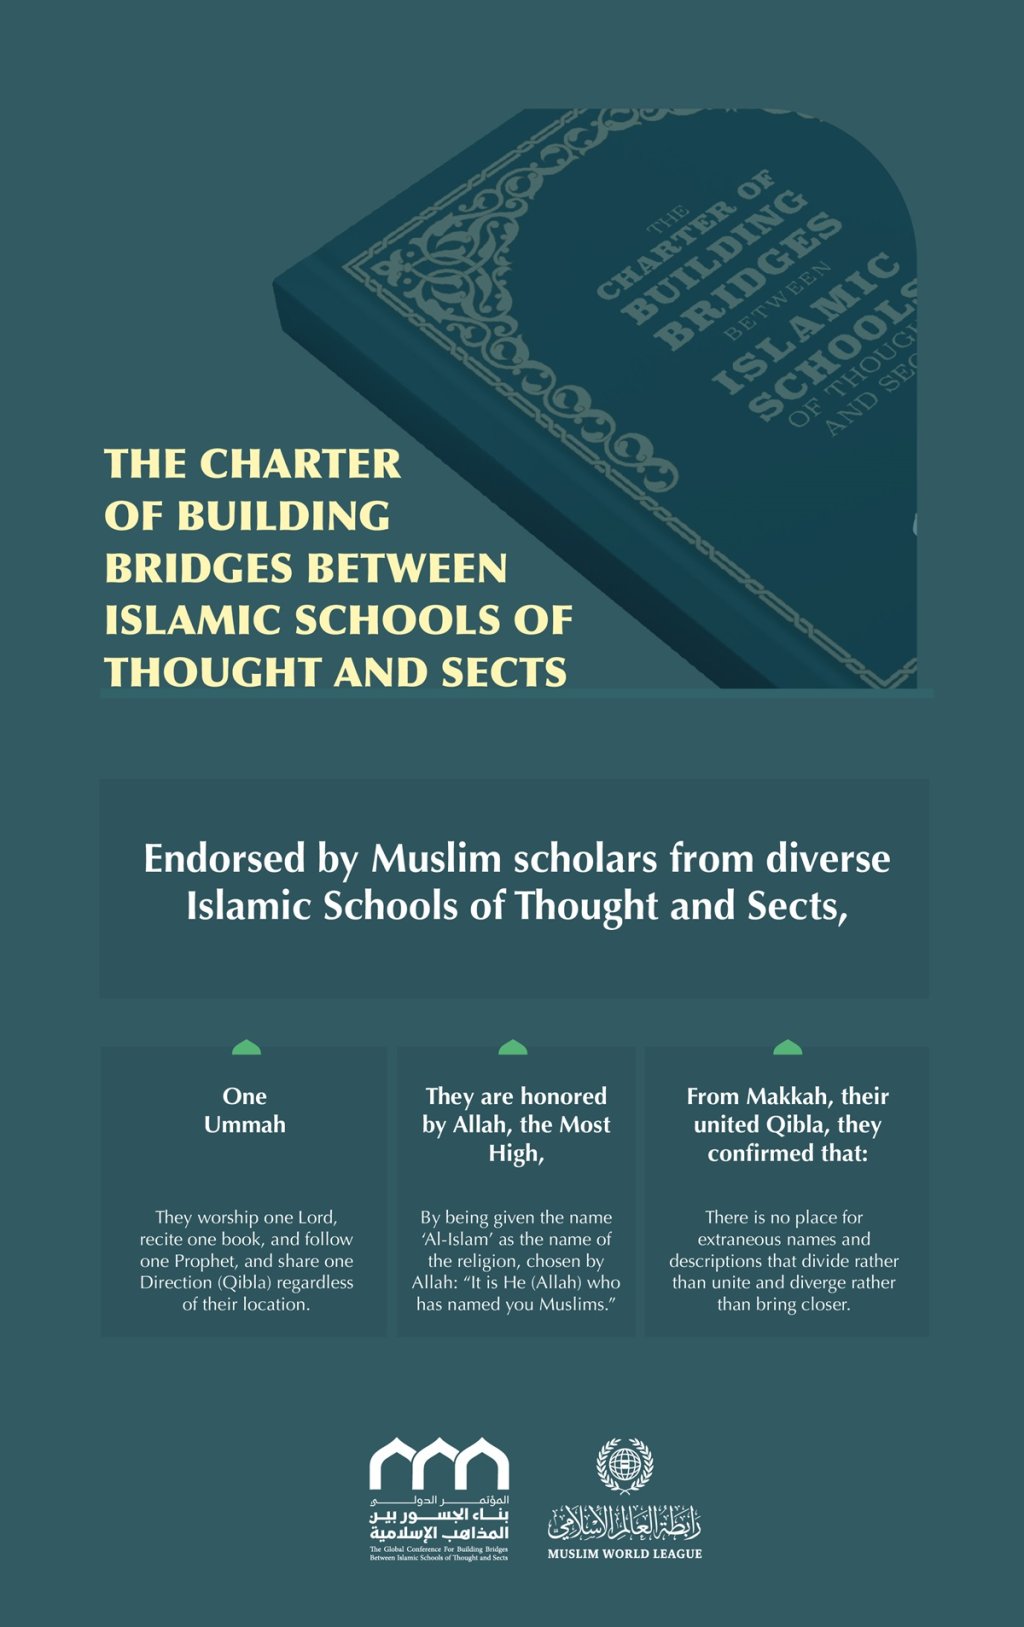 The Muslim World League issued the Charter of Building Bridges Between Islamic Schools of Thought